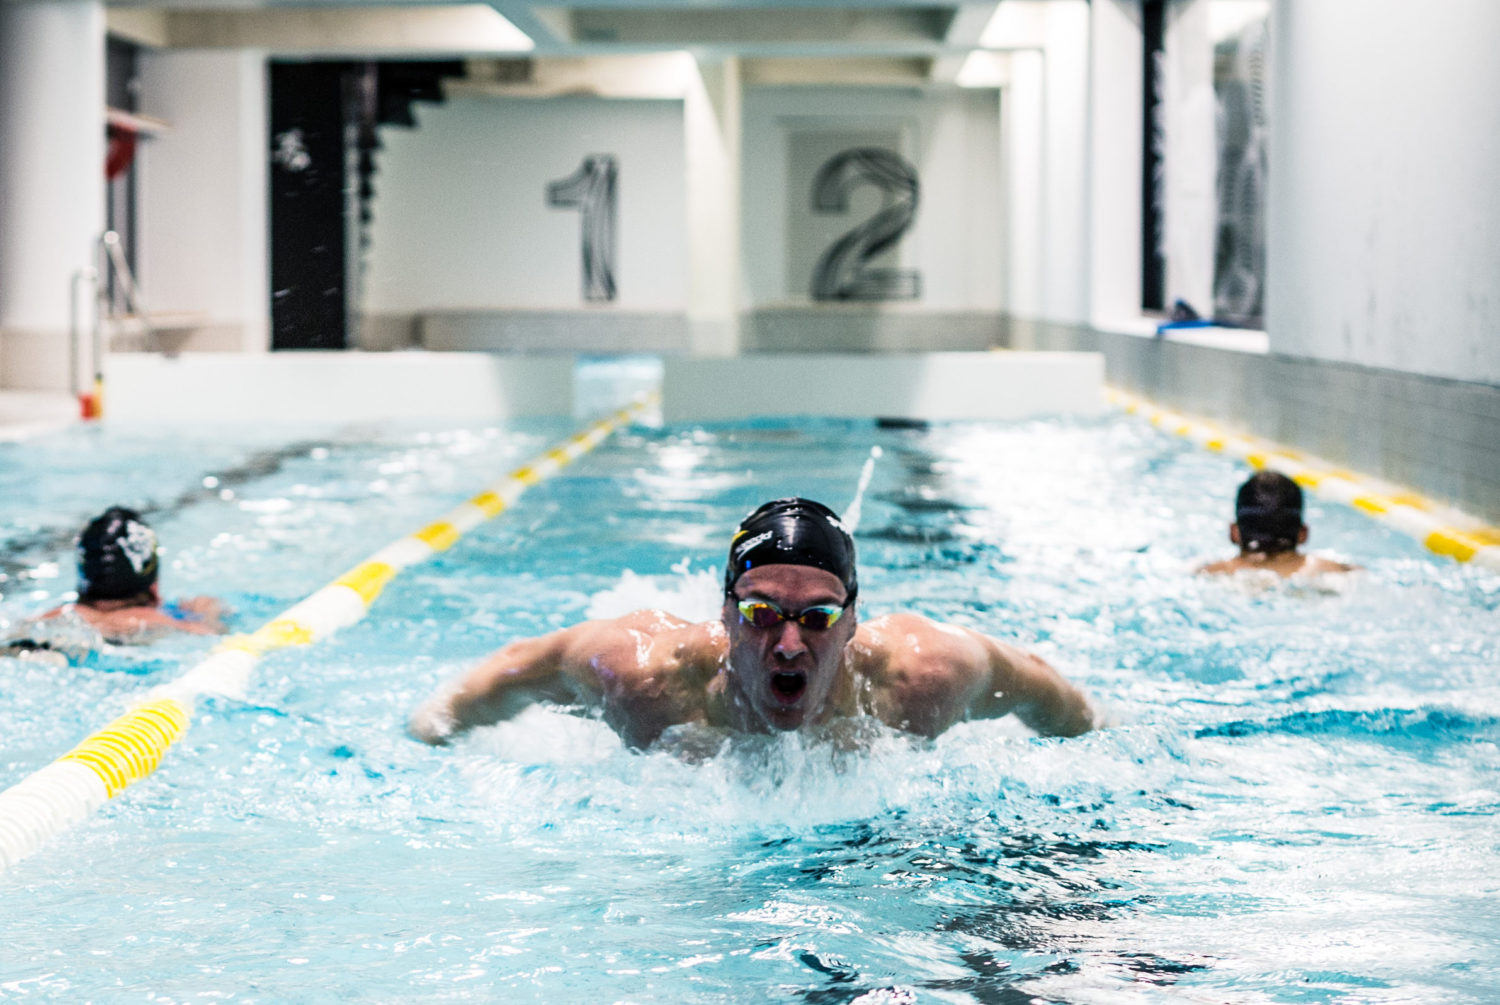 SwimGym clinics, masterclasses and workshops about swimming. Under supervision of founder Johan Kenkhuis, Olympic swimming medalist. Train Like A Pro.